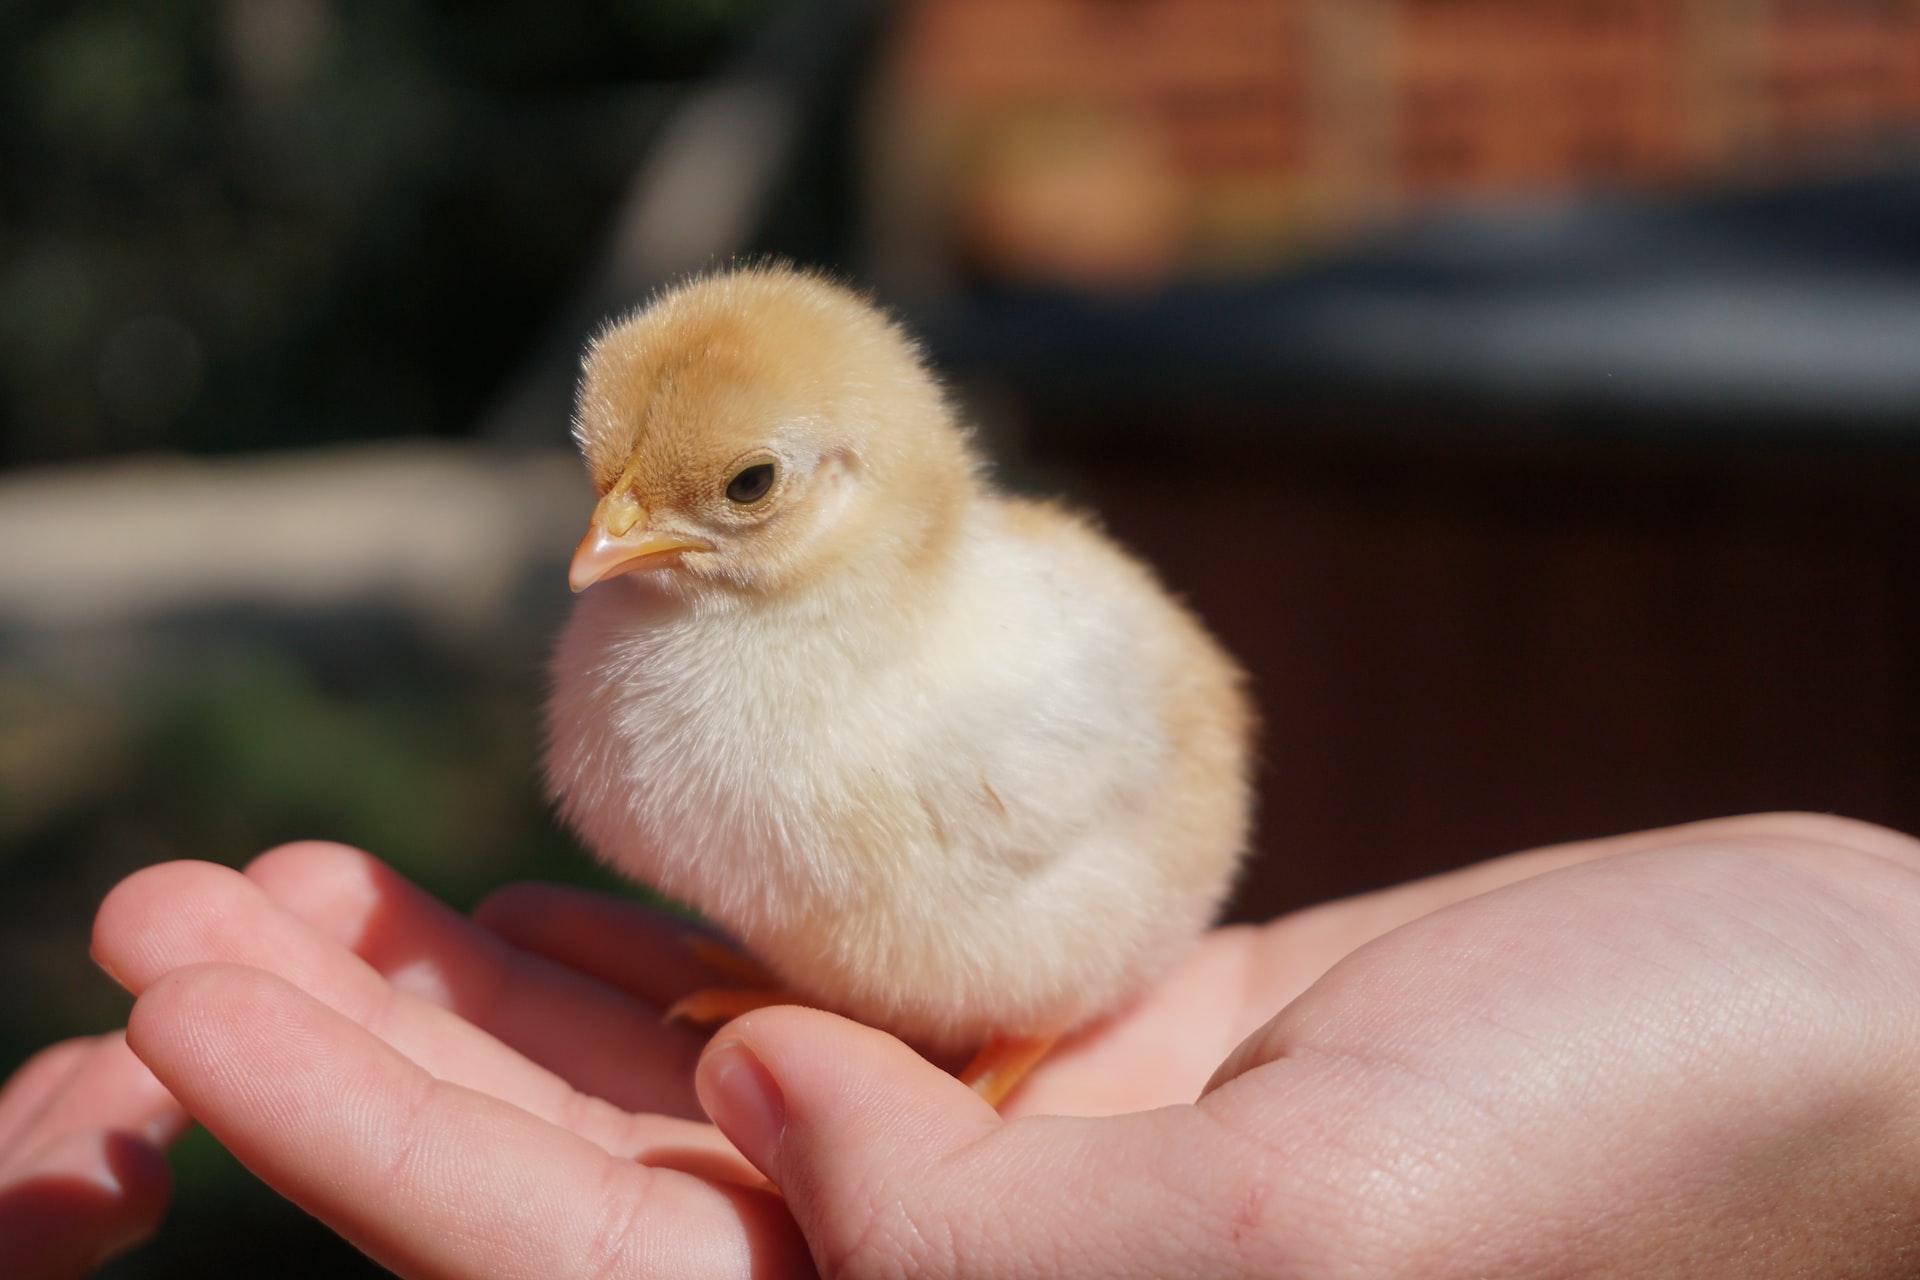 Baby chick in person's hand